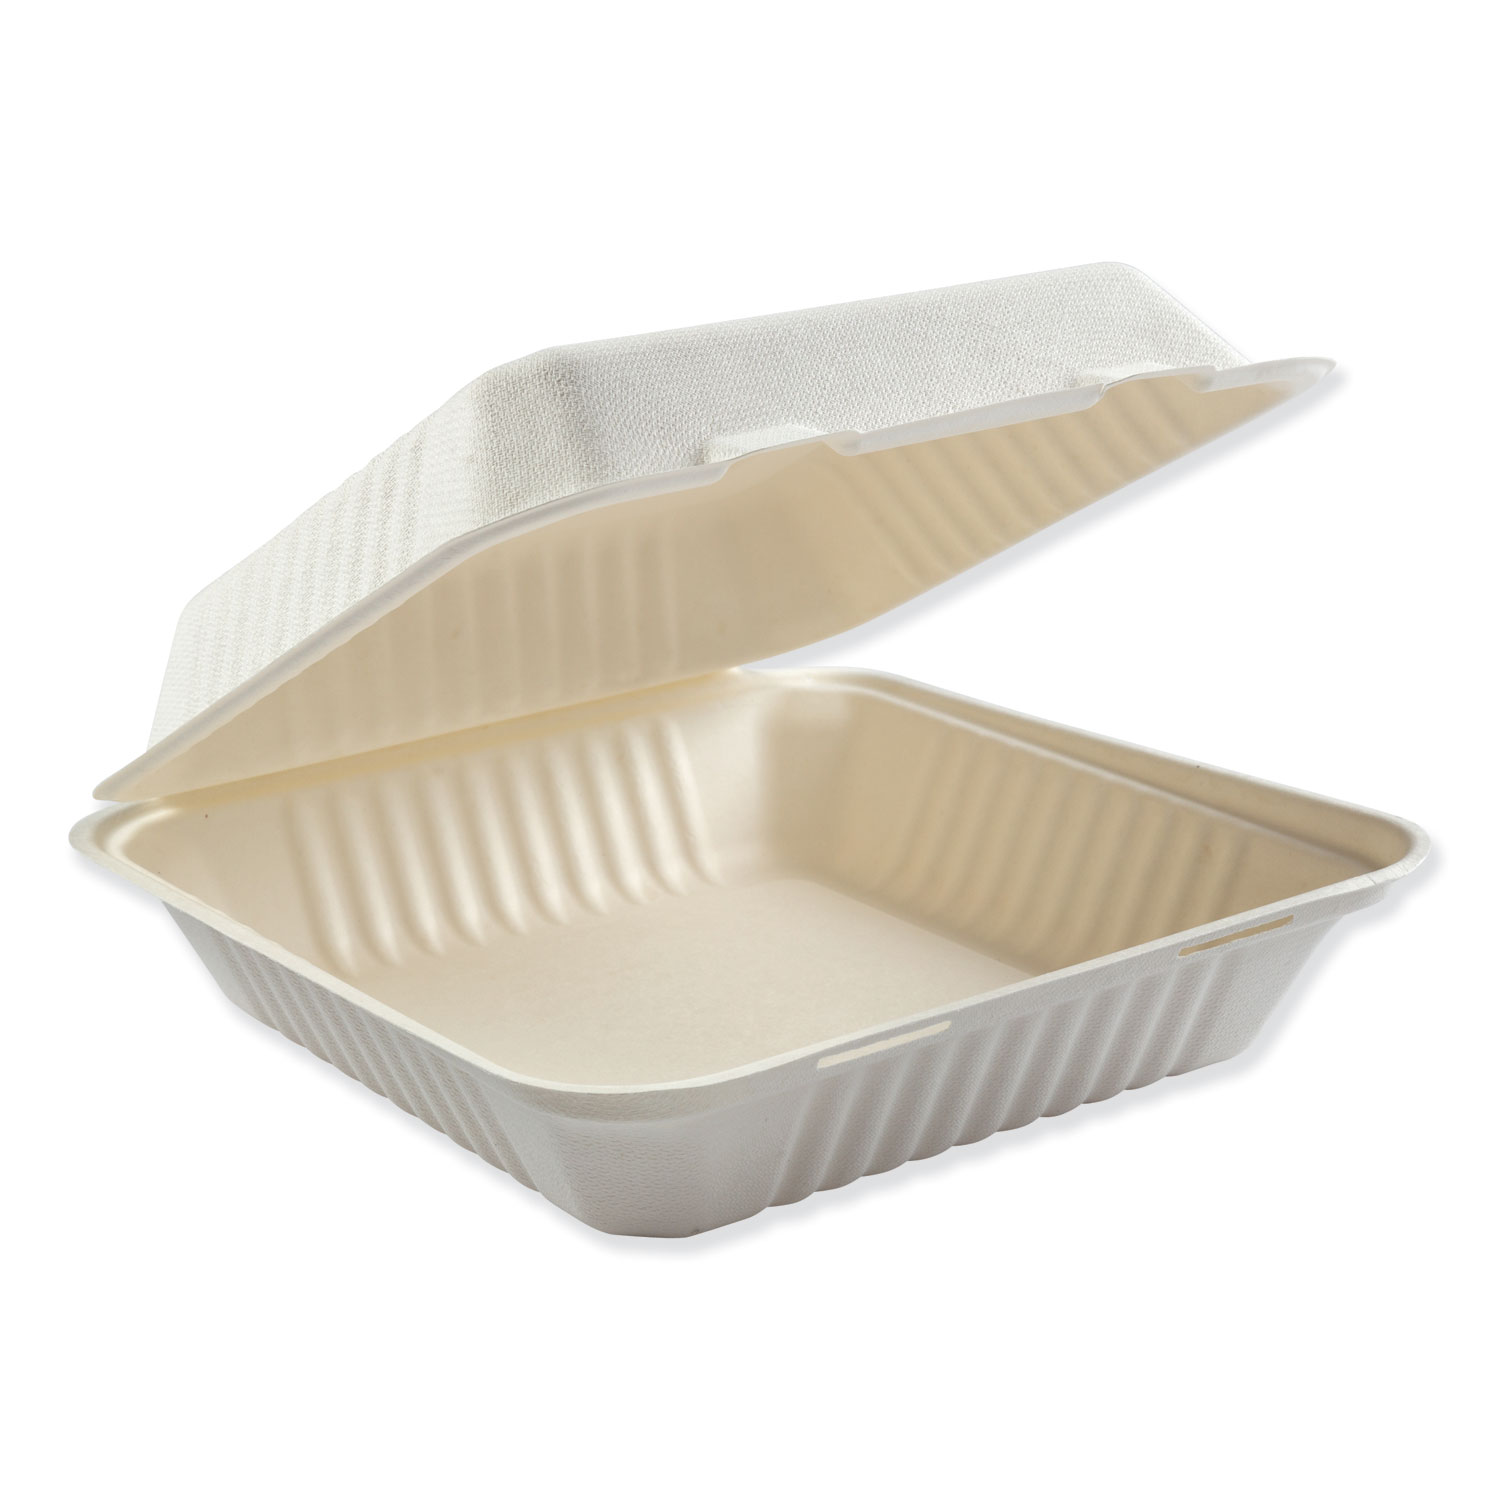  Boardwalk BWKHINGEWF1CM9 Bagasse Molded Fiber Food Containers, Hinged-Lid, 1-Compartment 9 x 9, White, 100/Sleeve, 2 Sleeves/Carton (BWKHINGEWF1CM9) 